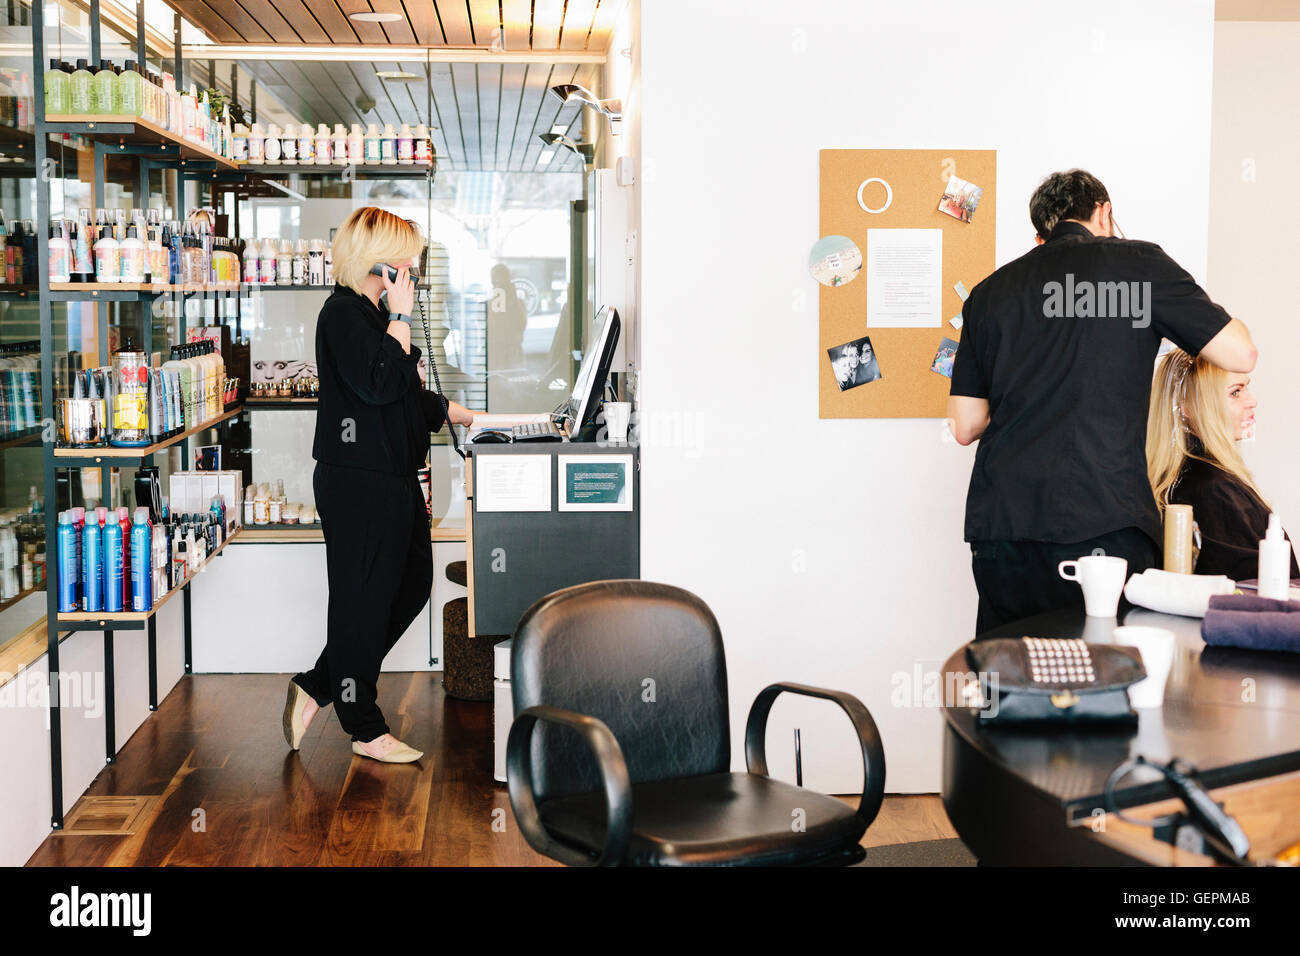 A hair stylist working on a client's hair, and a woman on the telephone, looking at a laptop computer. Stock Photo